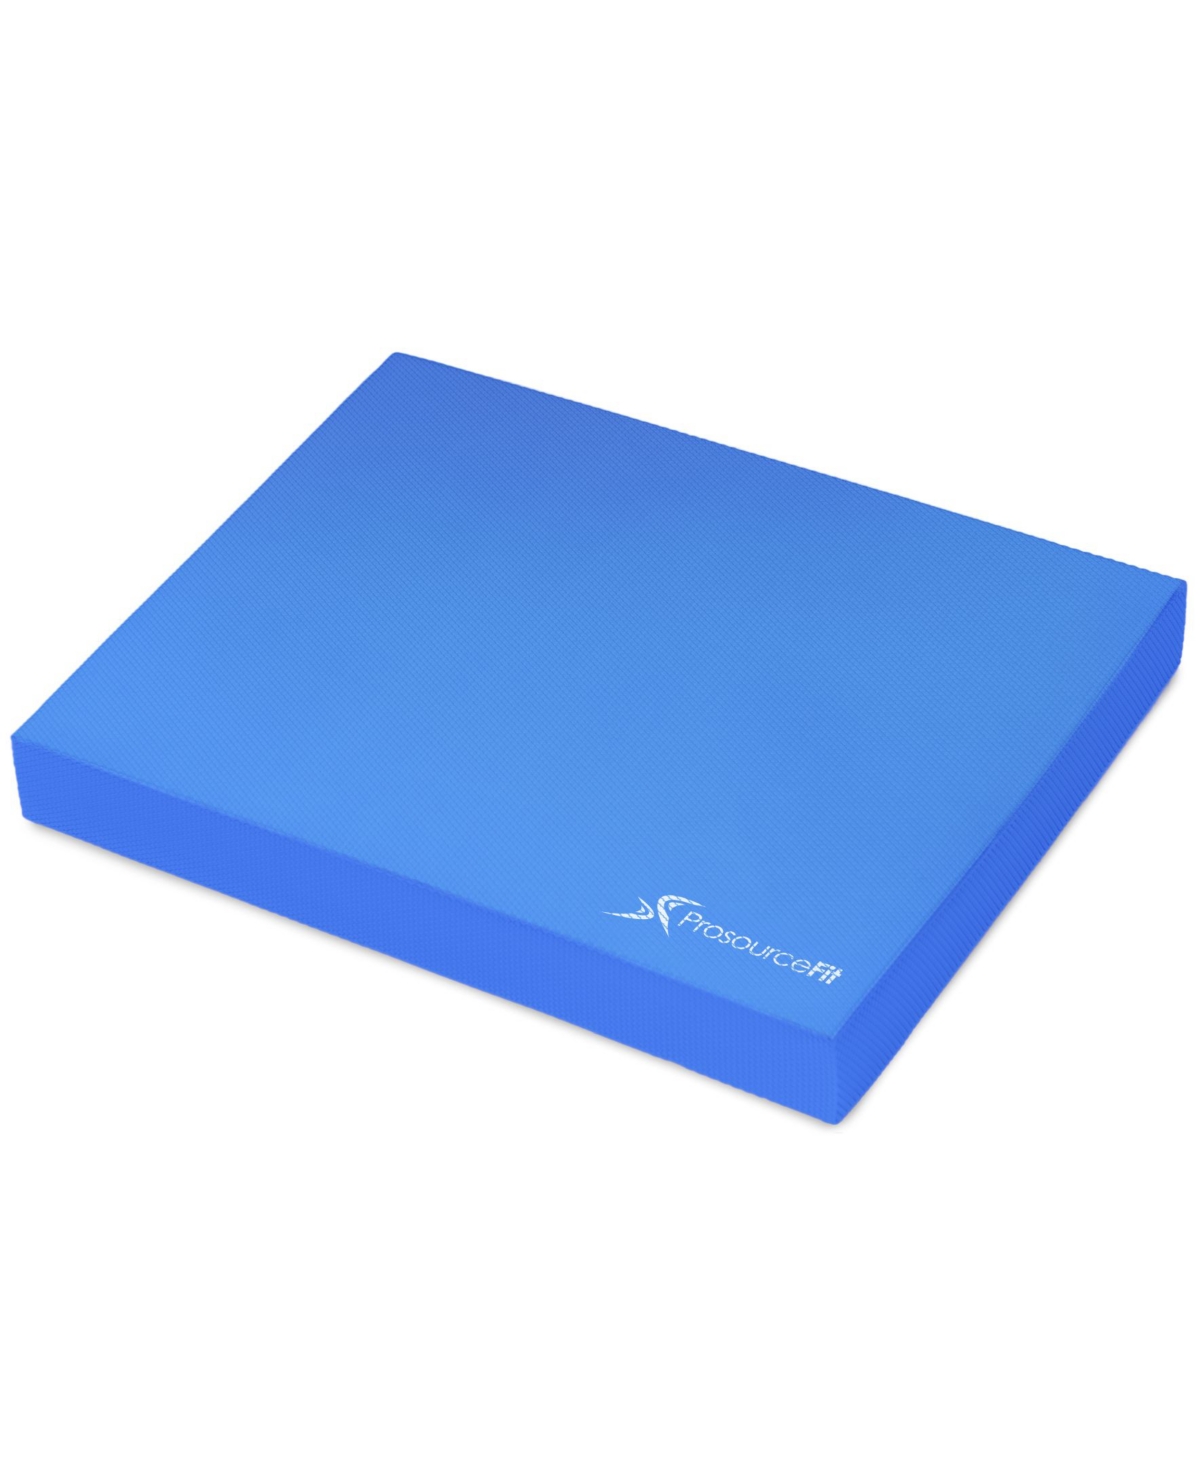 Exercise Balance Pad 15x18.75-in - Blue